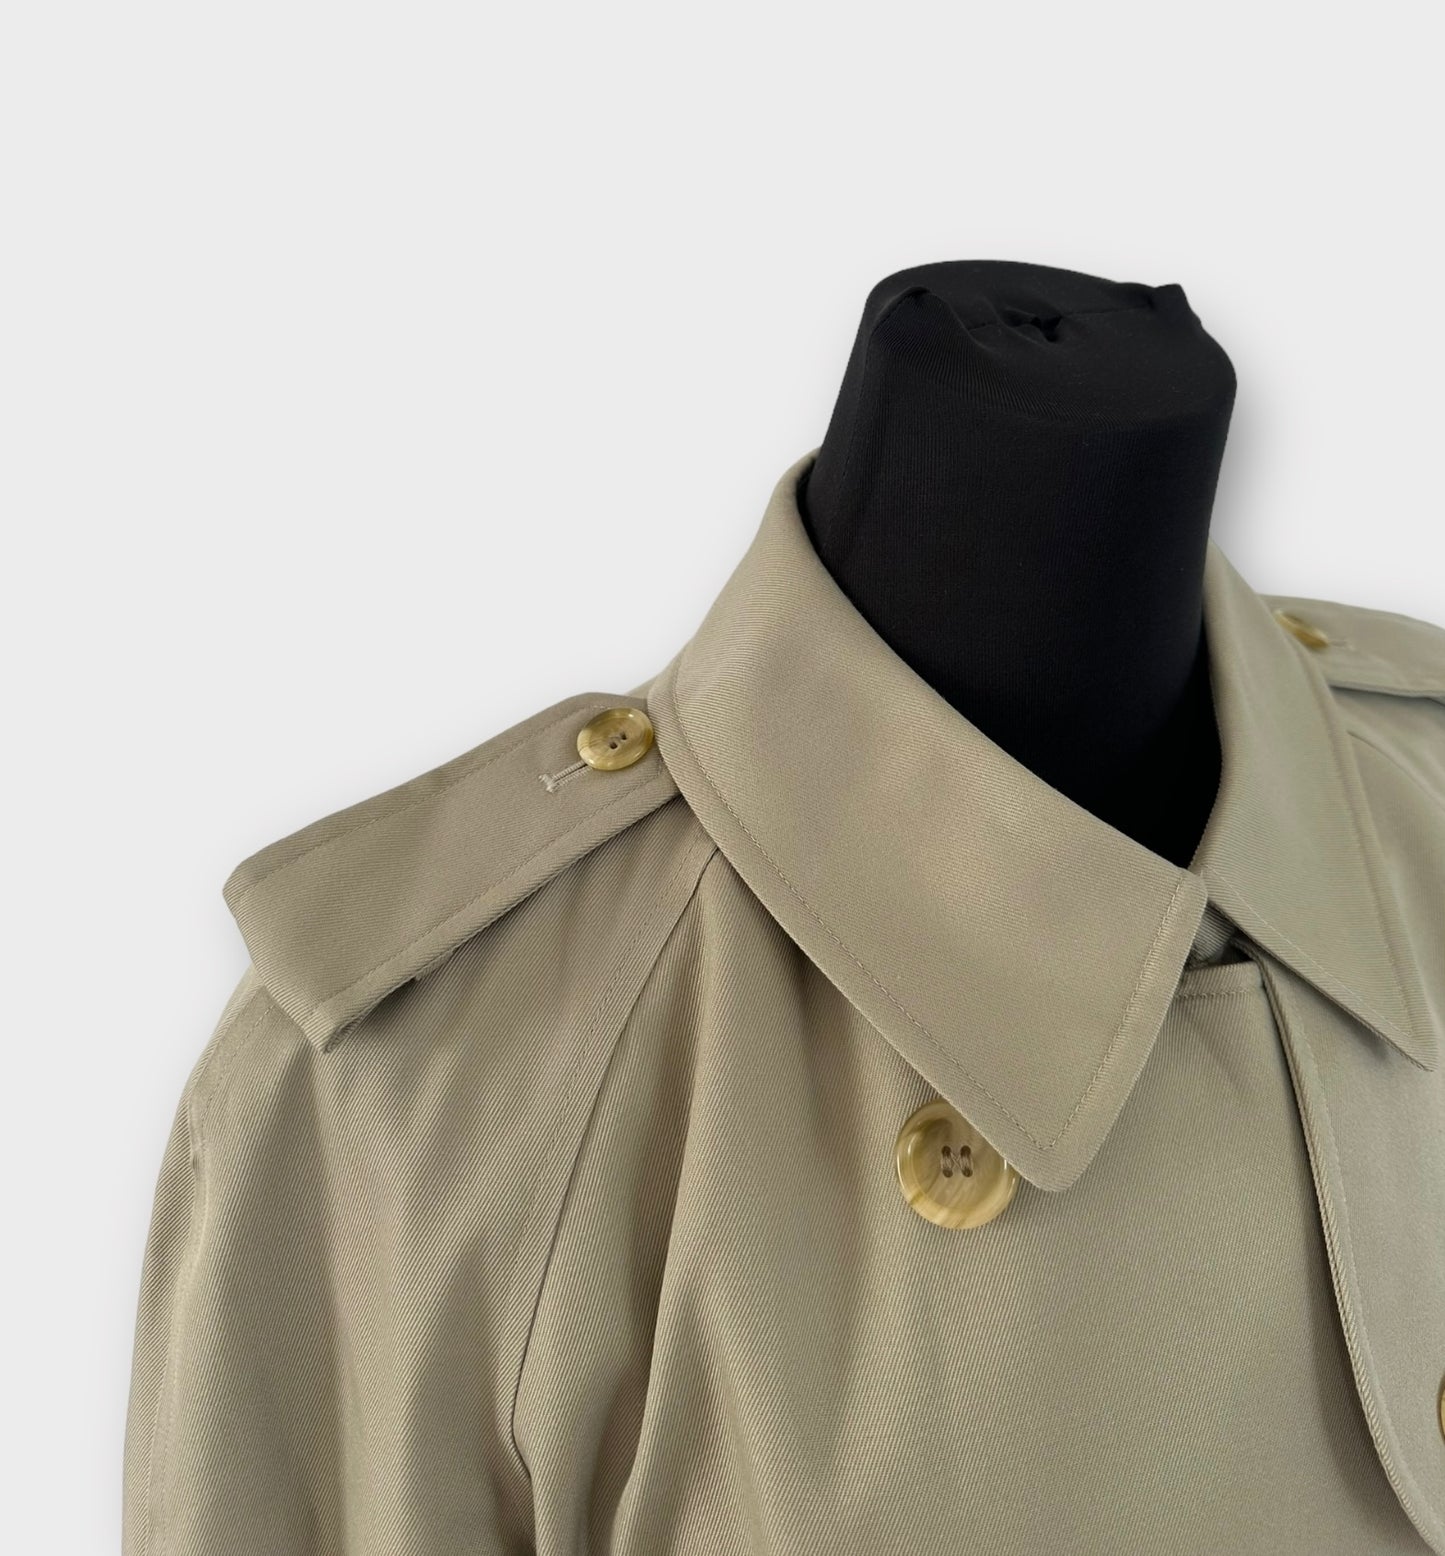 Trench-coat Burberry modèle “the Waterloo ” vintage/ T.M